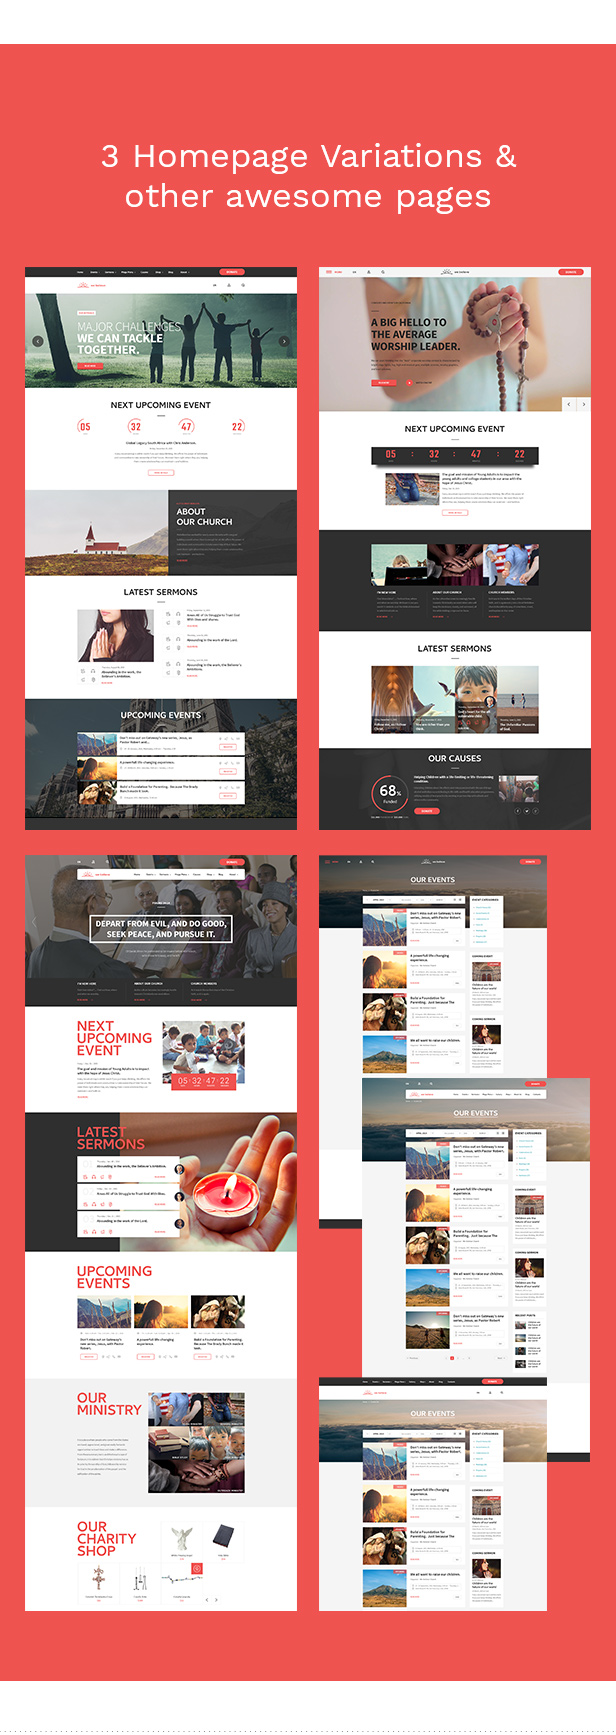  WeBelieve - Church, Charity, Nonprofit & Fundraising Responsive HTML5 Template - 9